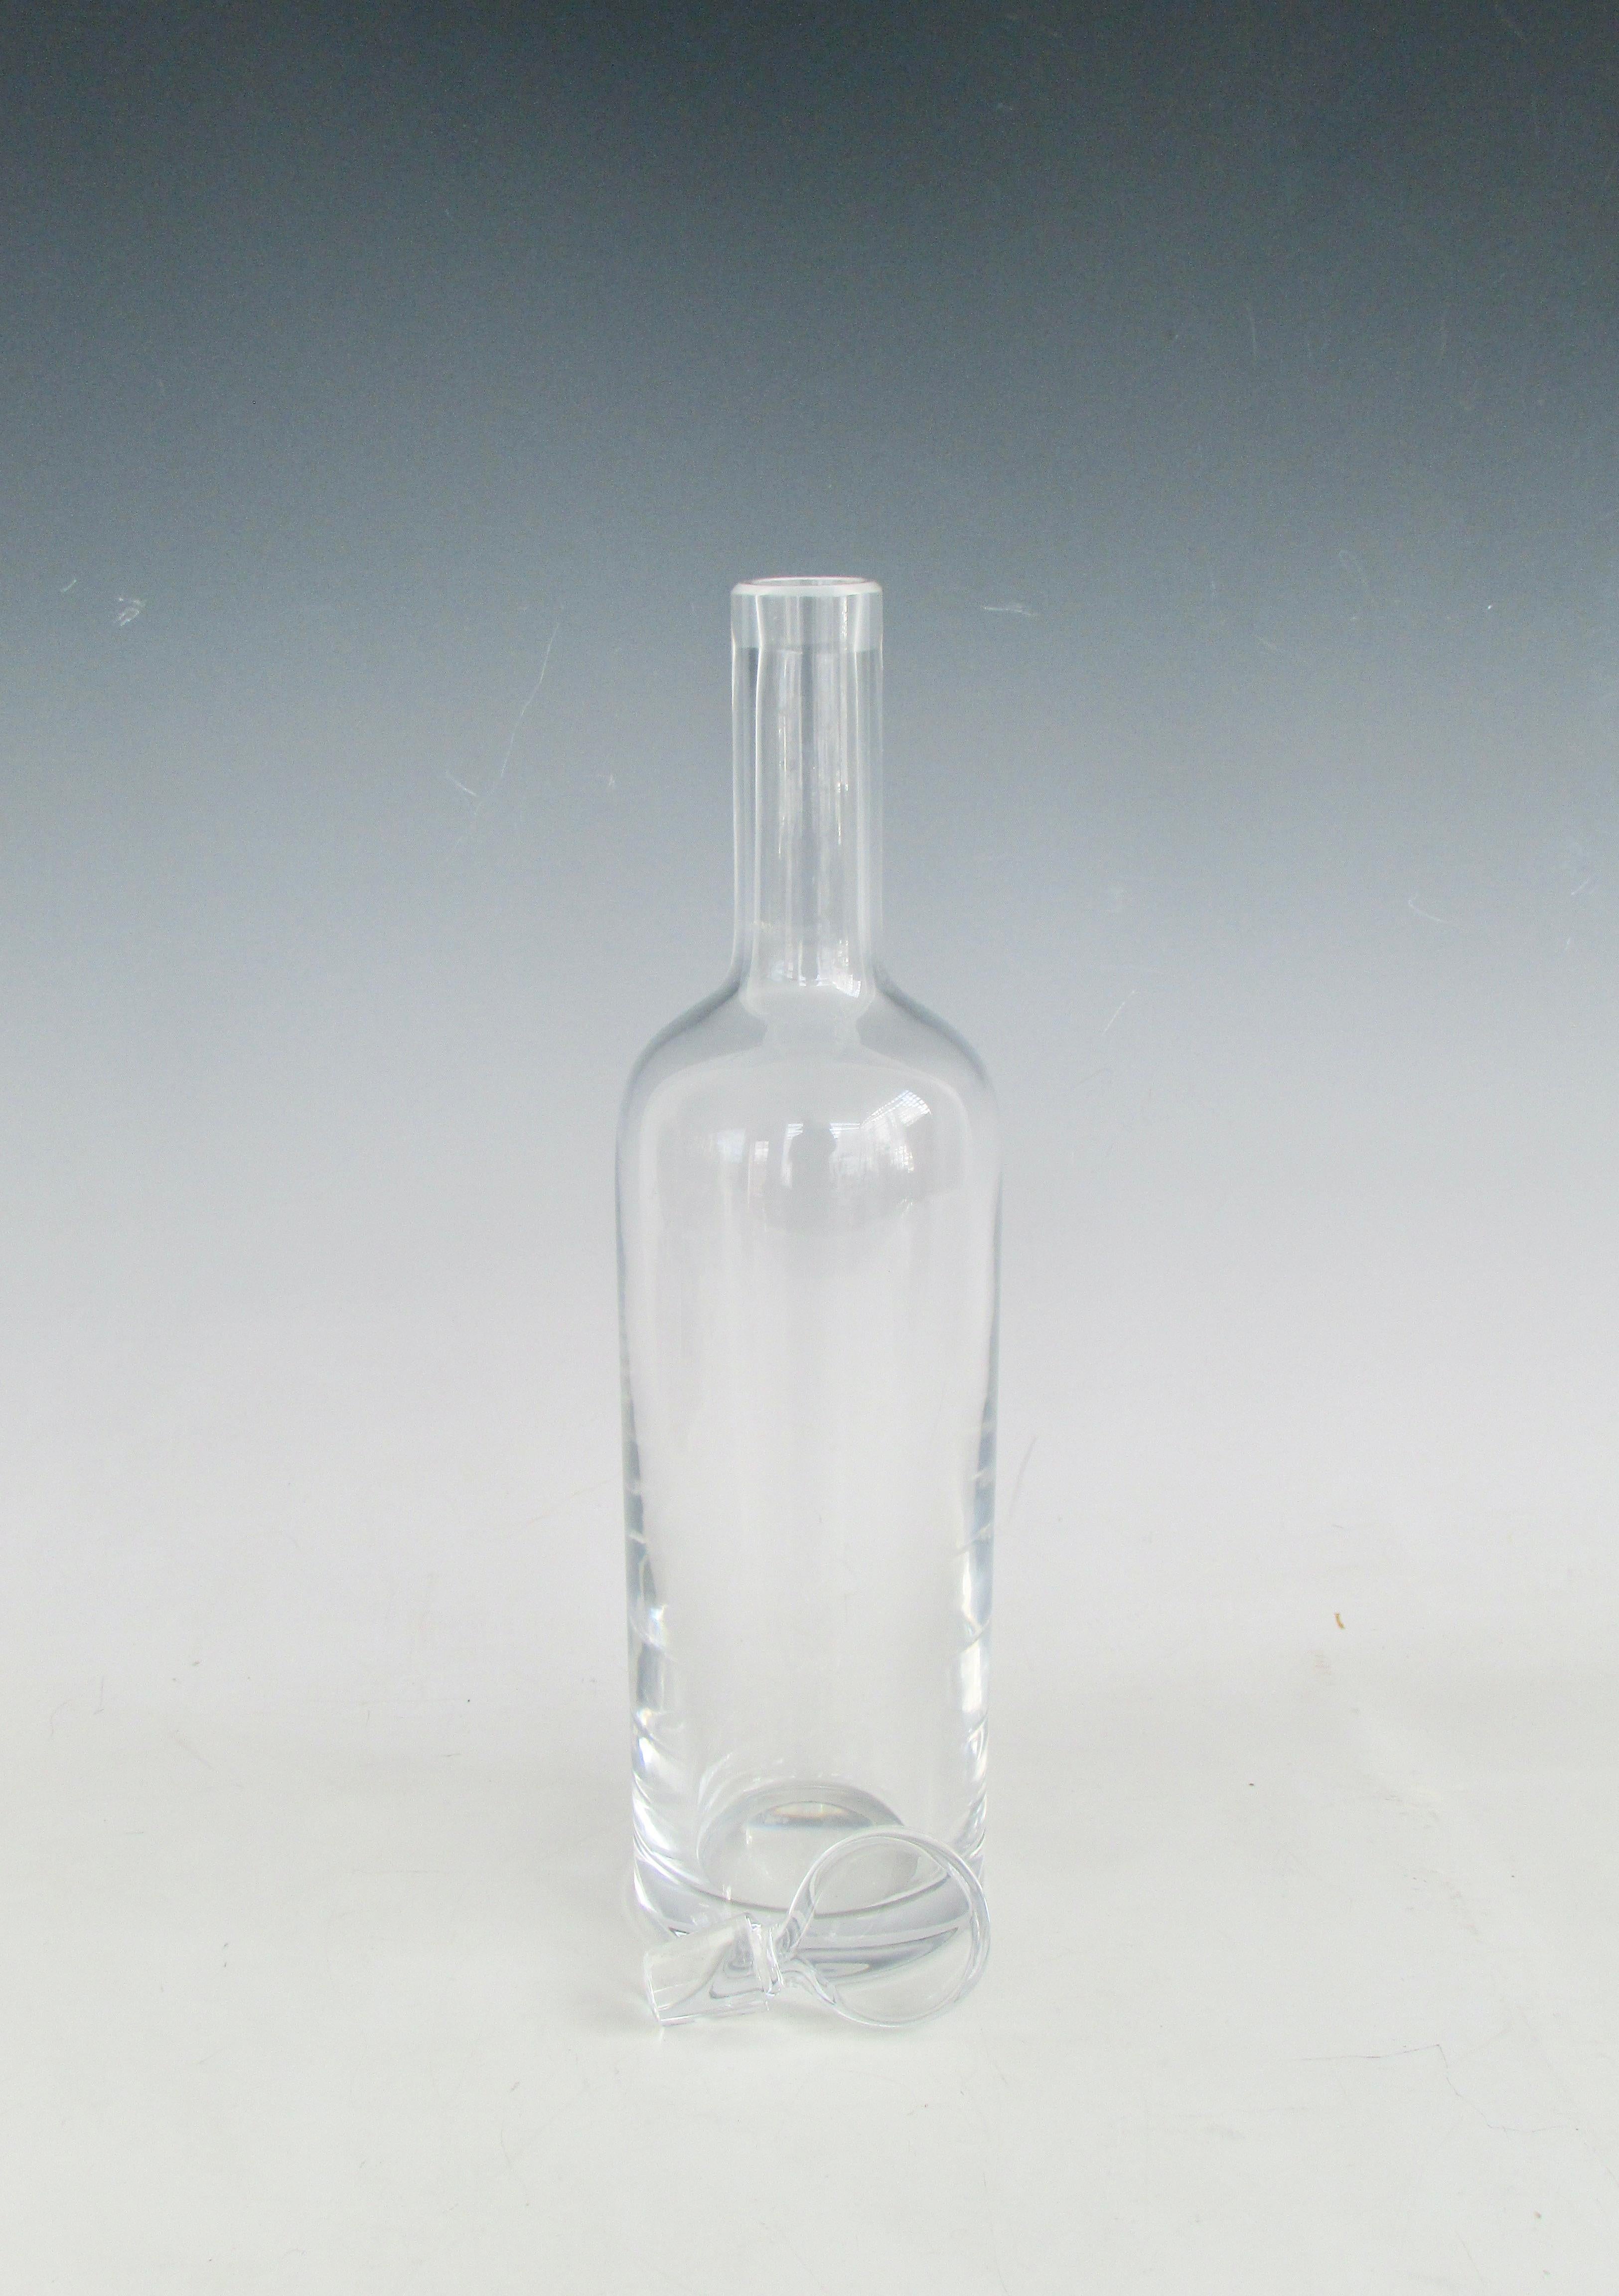 American Classical Baccarat France  Clear Lead Crystal Bottle Decanter with Stopper